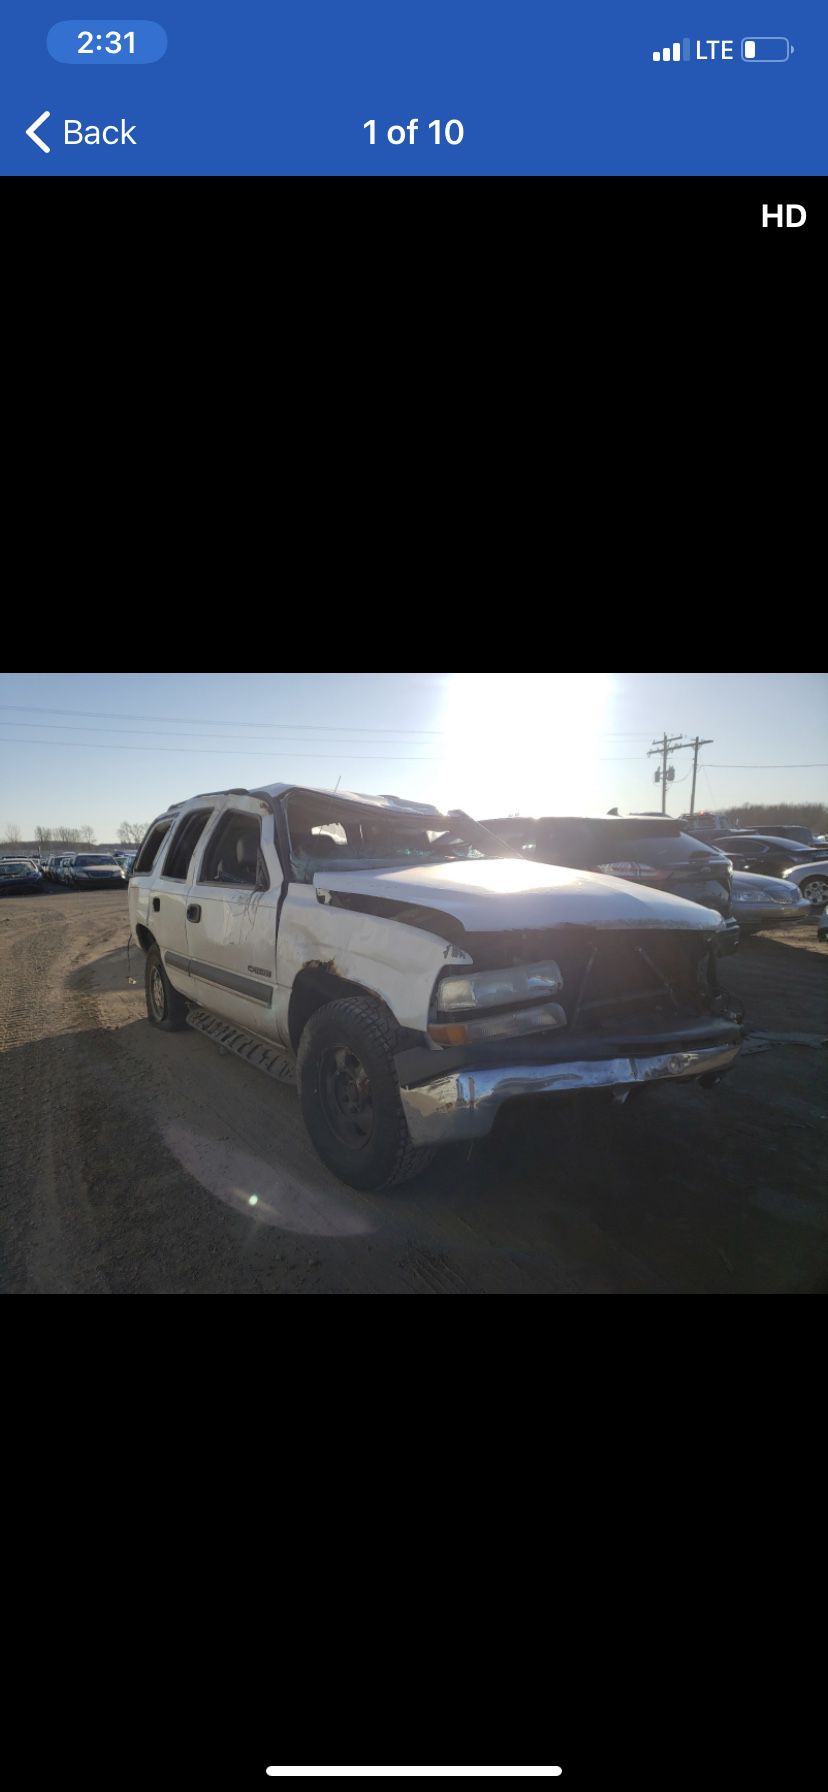 Chevy Tahoe With 5.3 Engine - 20*03 - 4 Wheel Drive For Parts